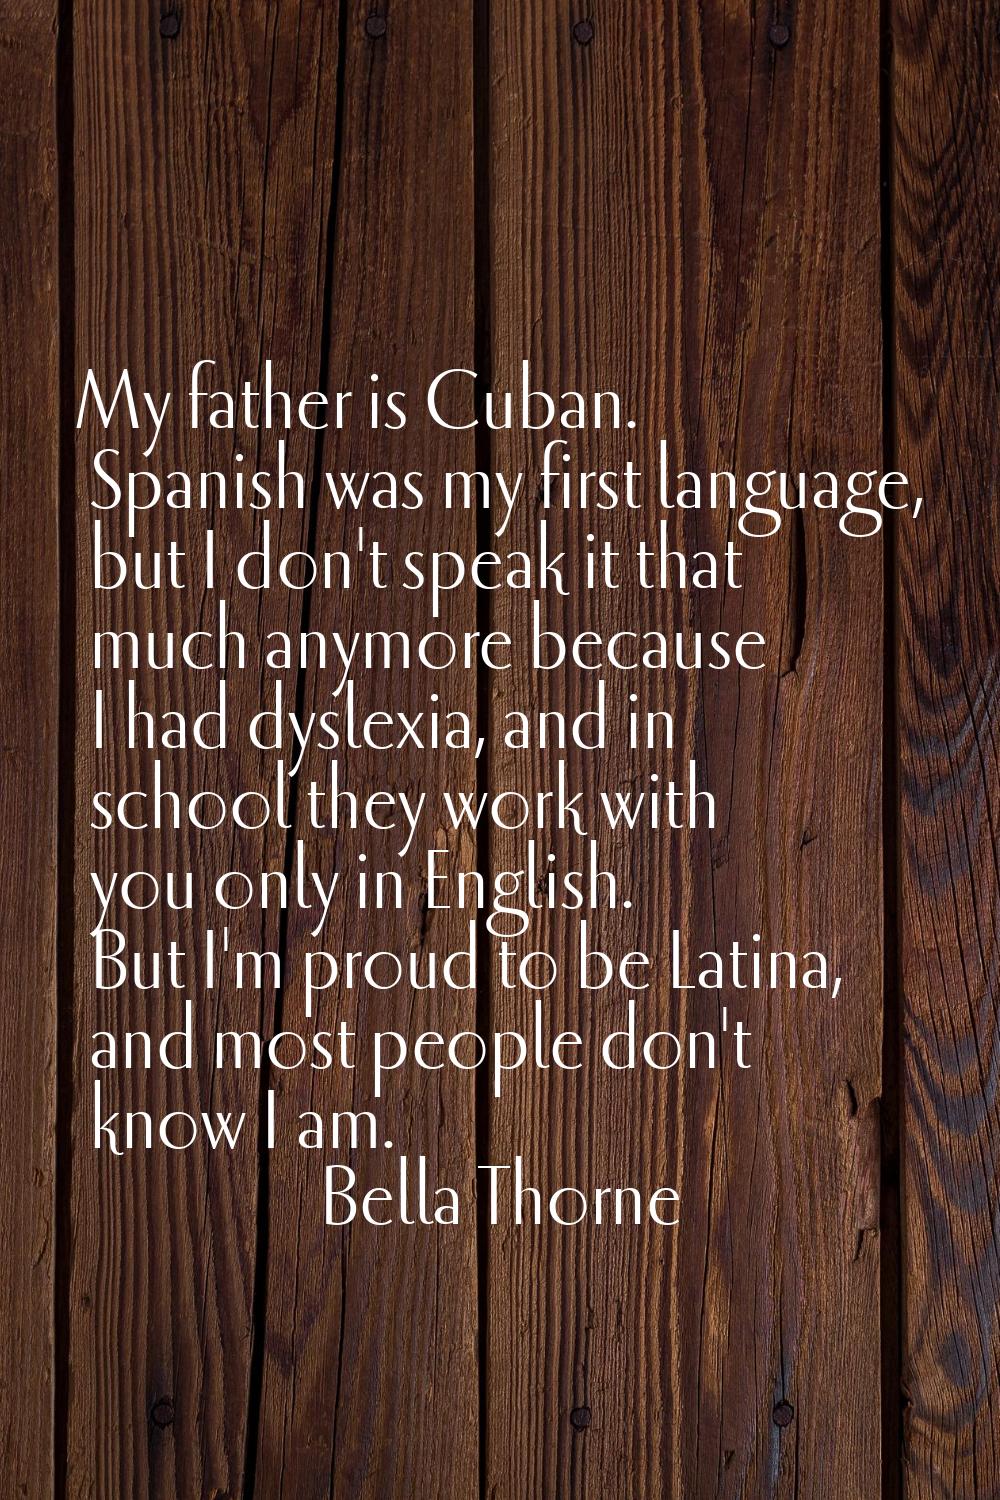 My father is Cuban. Spanish was my first language, but I don't speak it that much anymore because I